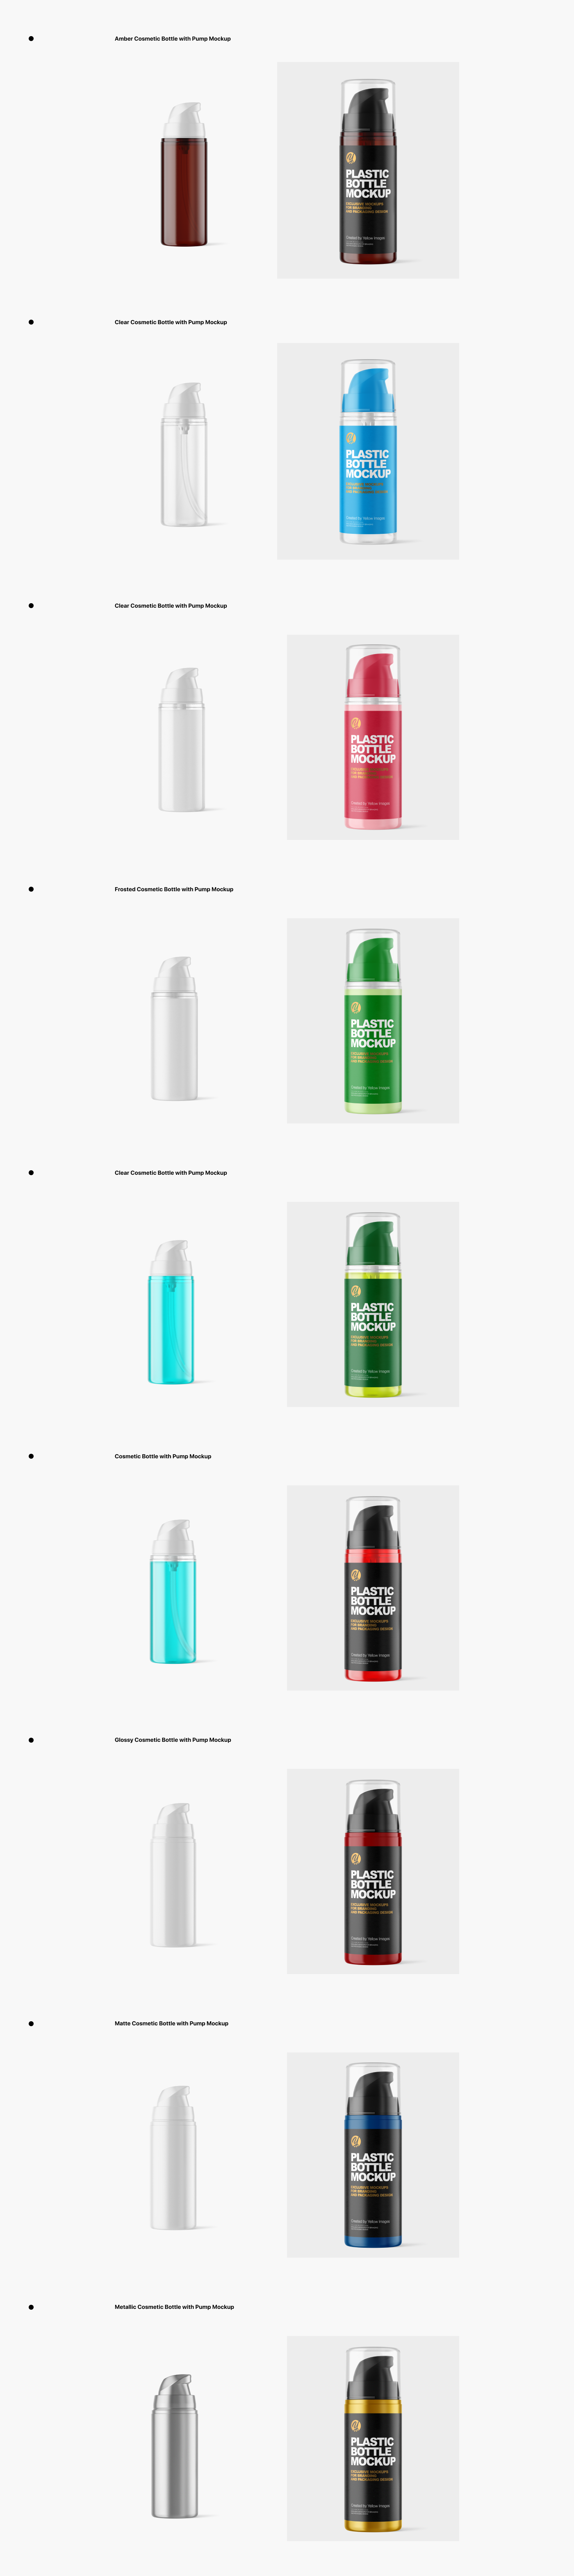 Download Plastic Bottles With Pump Mpckups Psd On Behance Yellowimages Mockups